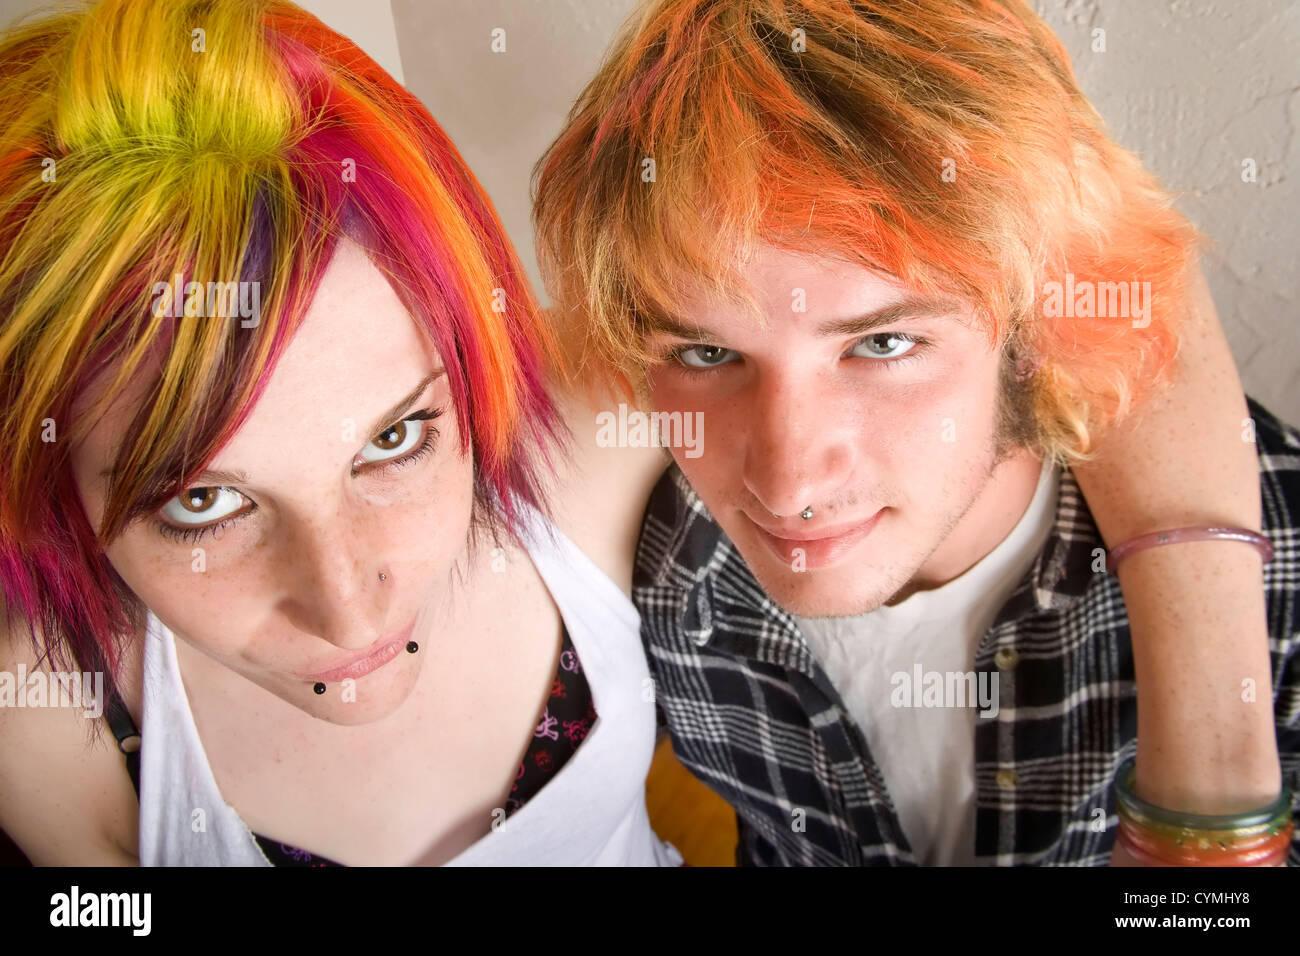 Portrait of Young Couple with Bright Colored Hair Embracing Stock Photo